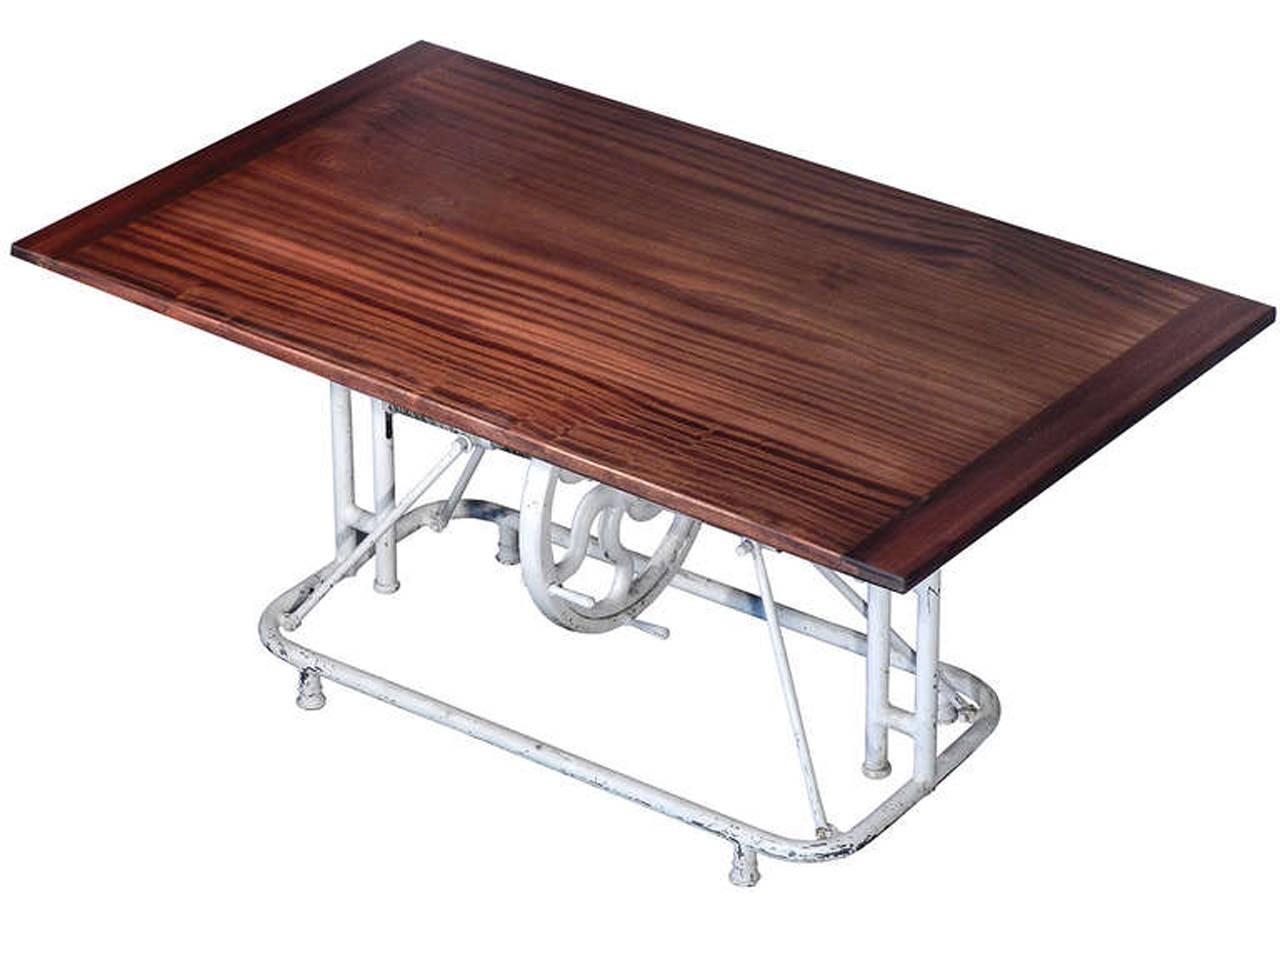 Mechanical furniture has become one of our specialties and these large wheel tables are one of my favorites. It's extremely solid and at the same time has a light and stylish look. This is something you don't often find in most industrial furniture.